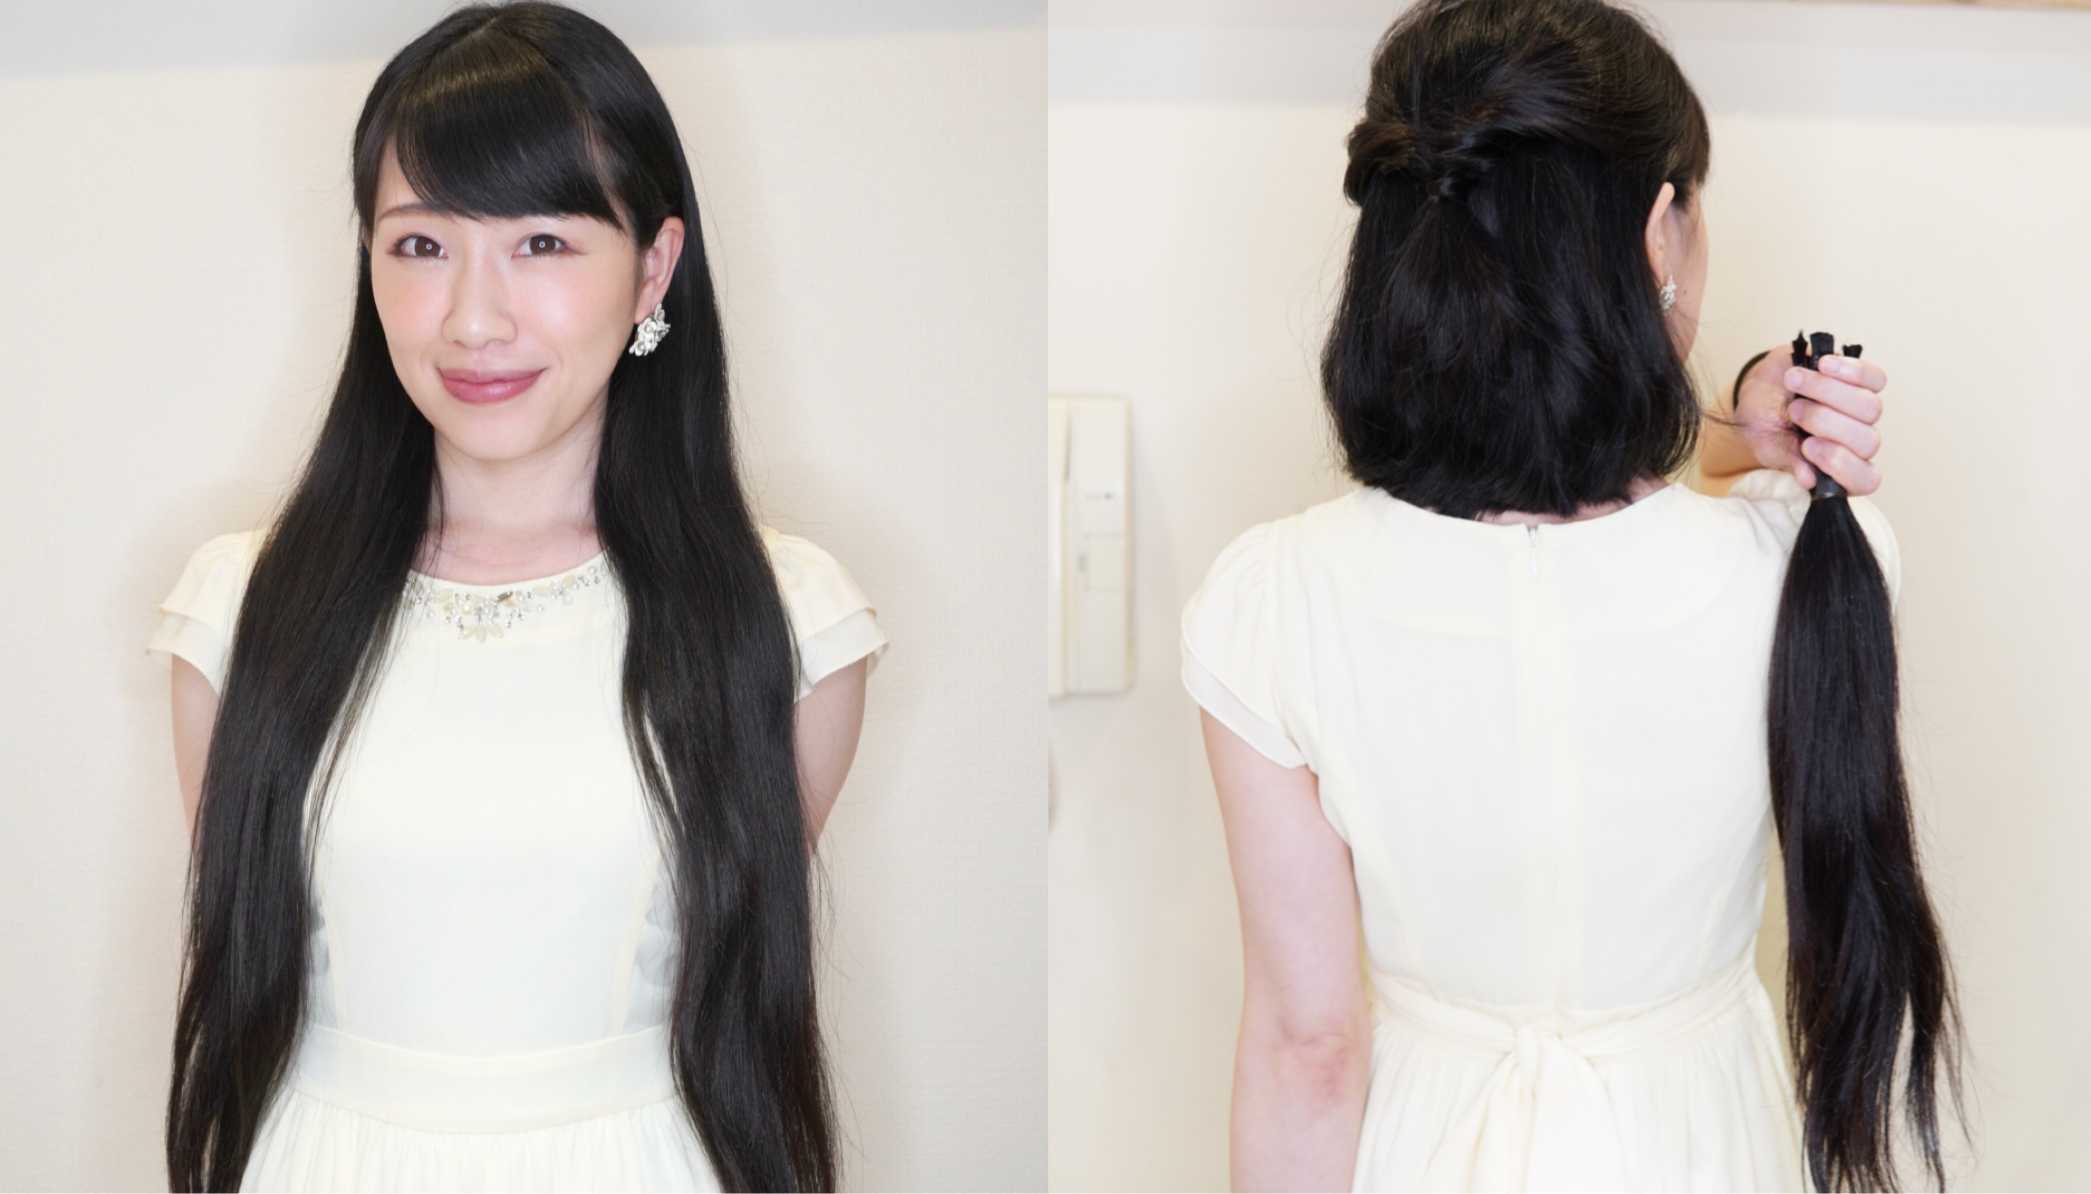 J149 女優みづきあかりさんの黒髪ロングバッサリヘアドネーション A Japanese Actress Chopped Her Beautiful Black Hair Off 45cm 断髪美人 Long To Short Haircut